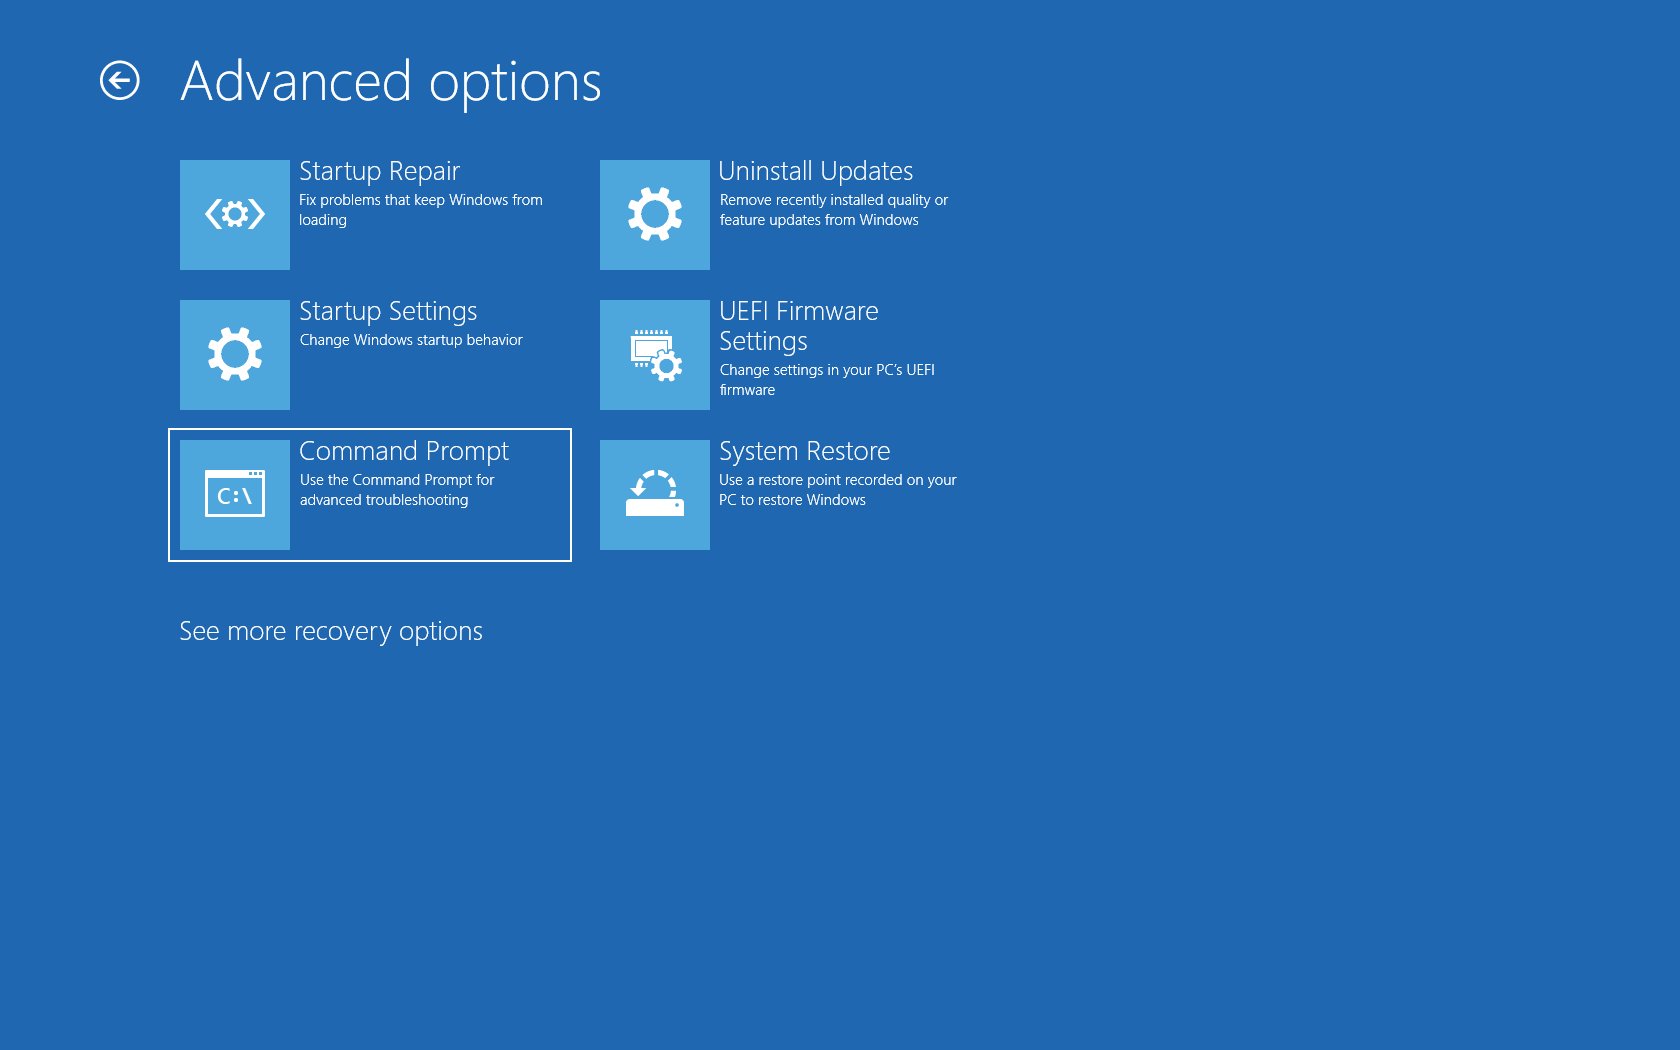 Then select Advanced options on the Troubleshoot screen.